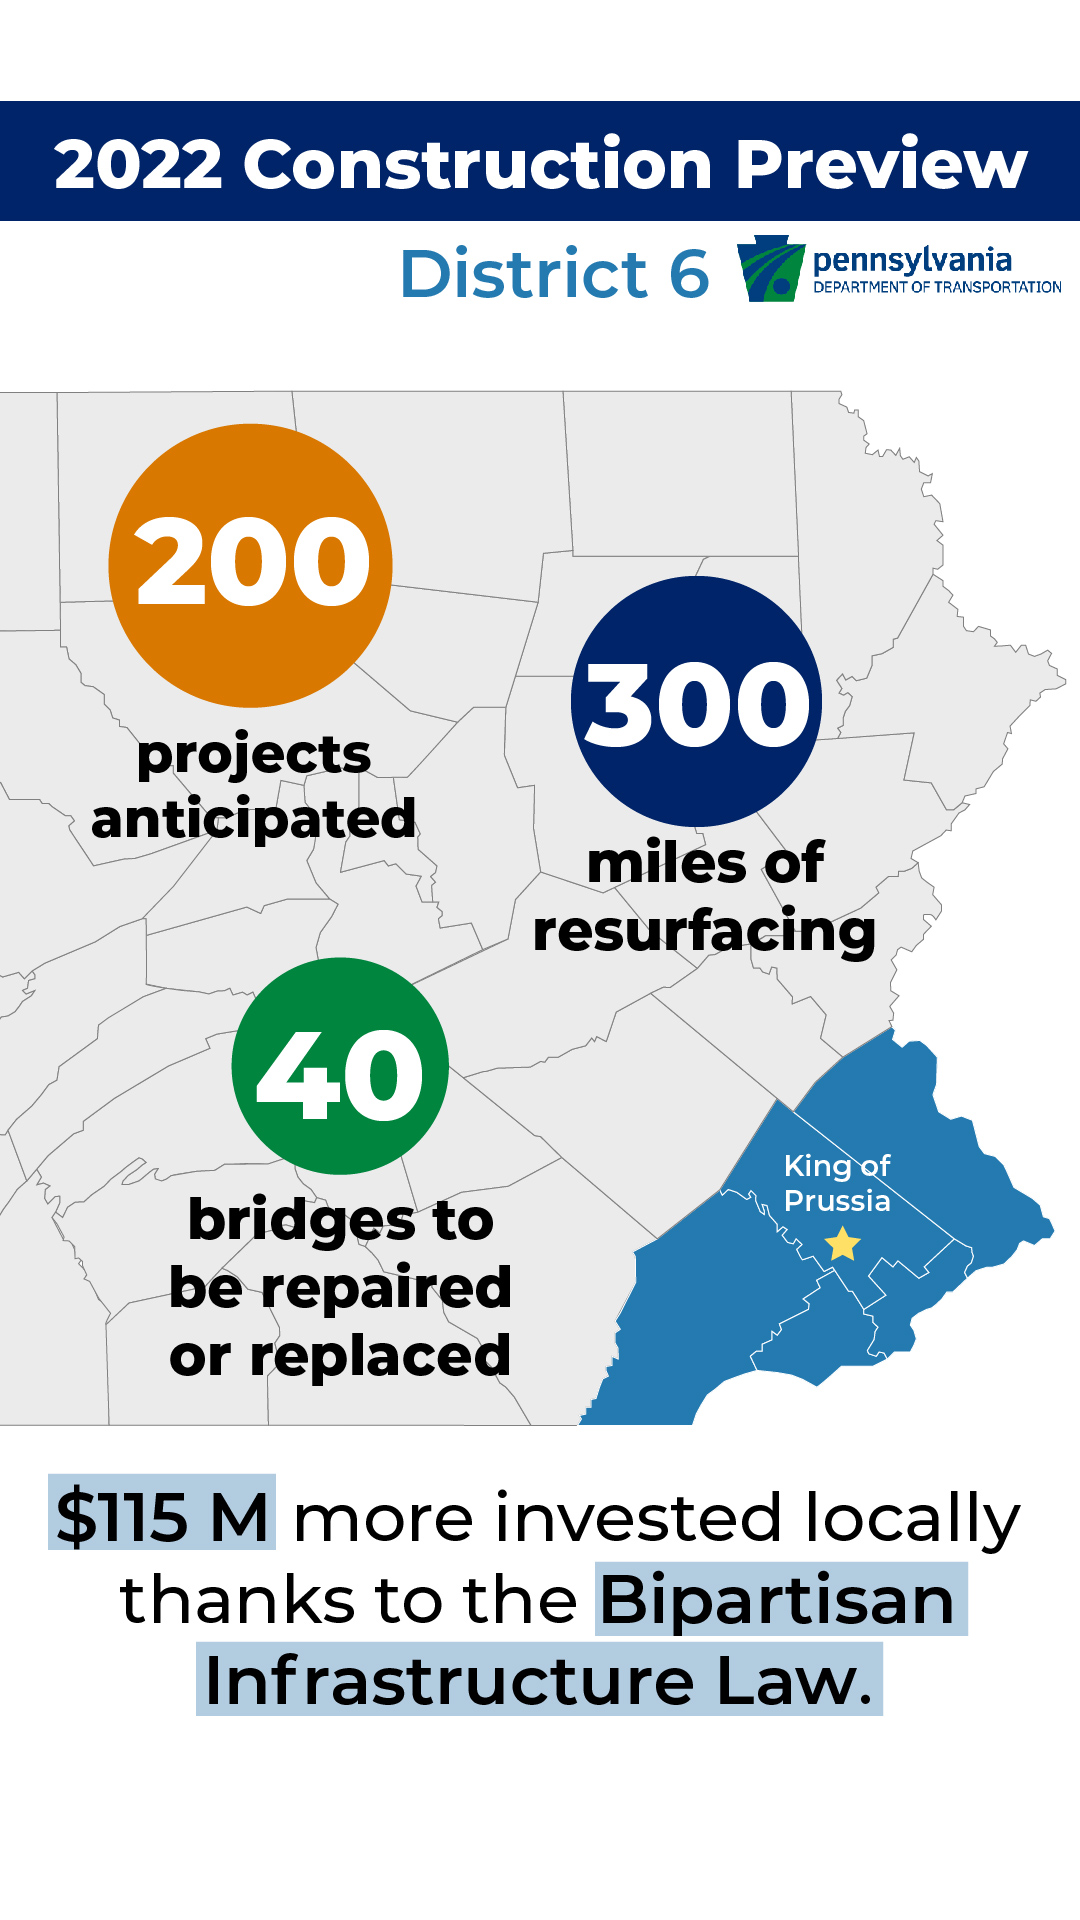 In PennDOT's District 6, 200 projects are anticipated for 2022, as well as 300 miles of resurfacing, and 40 bridge repairs or replacements. Thanks to the Bipartisan Infrastructure Law, $115 million more will be invested locally.